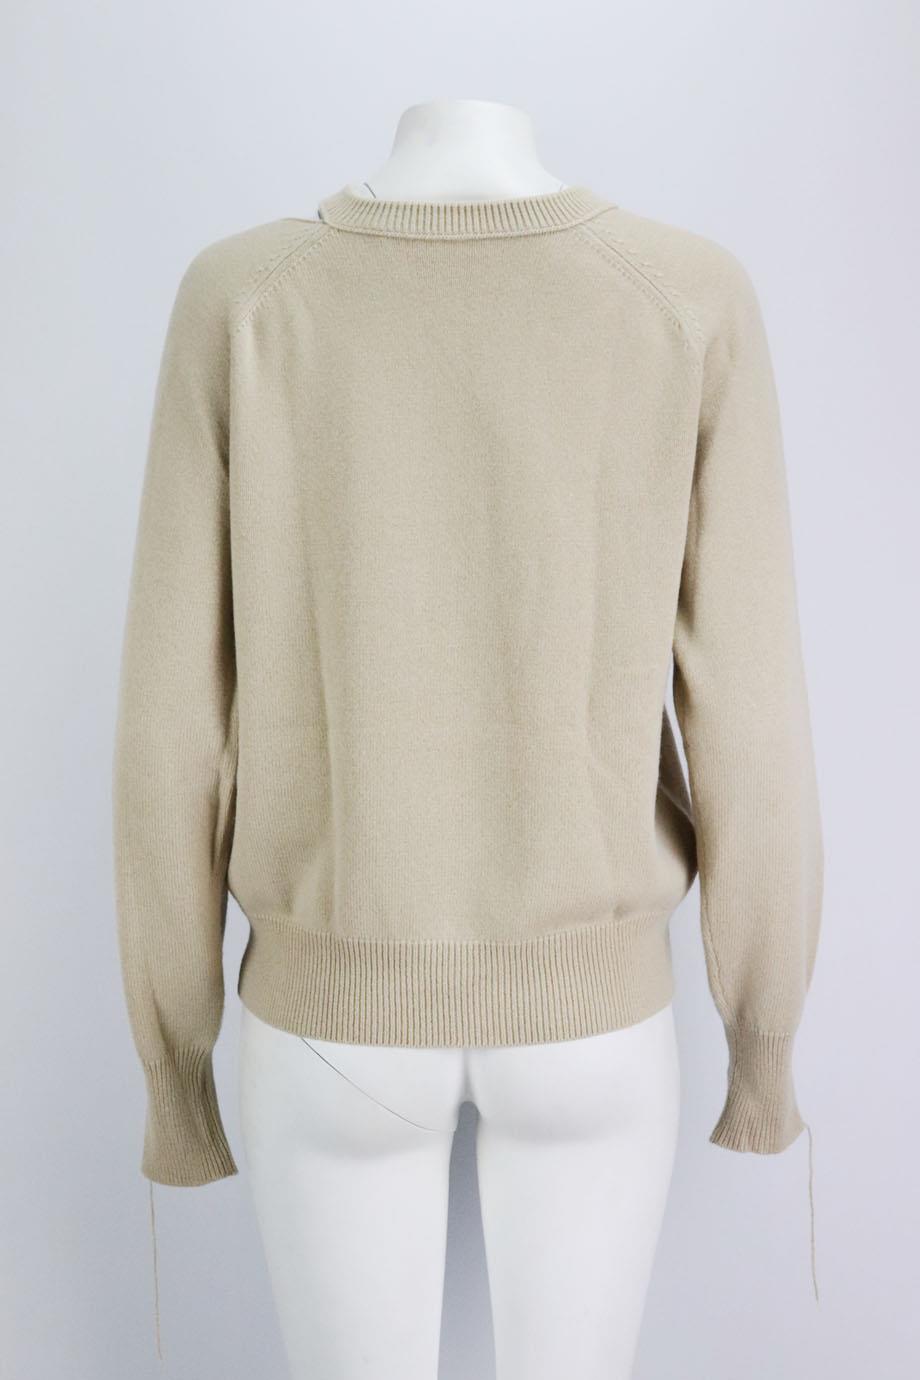 HELMUT LANG DISTESSED WOOL AND CASHMERE SWEATER SMALL